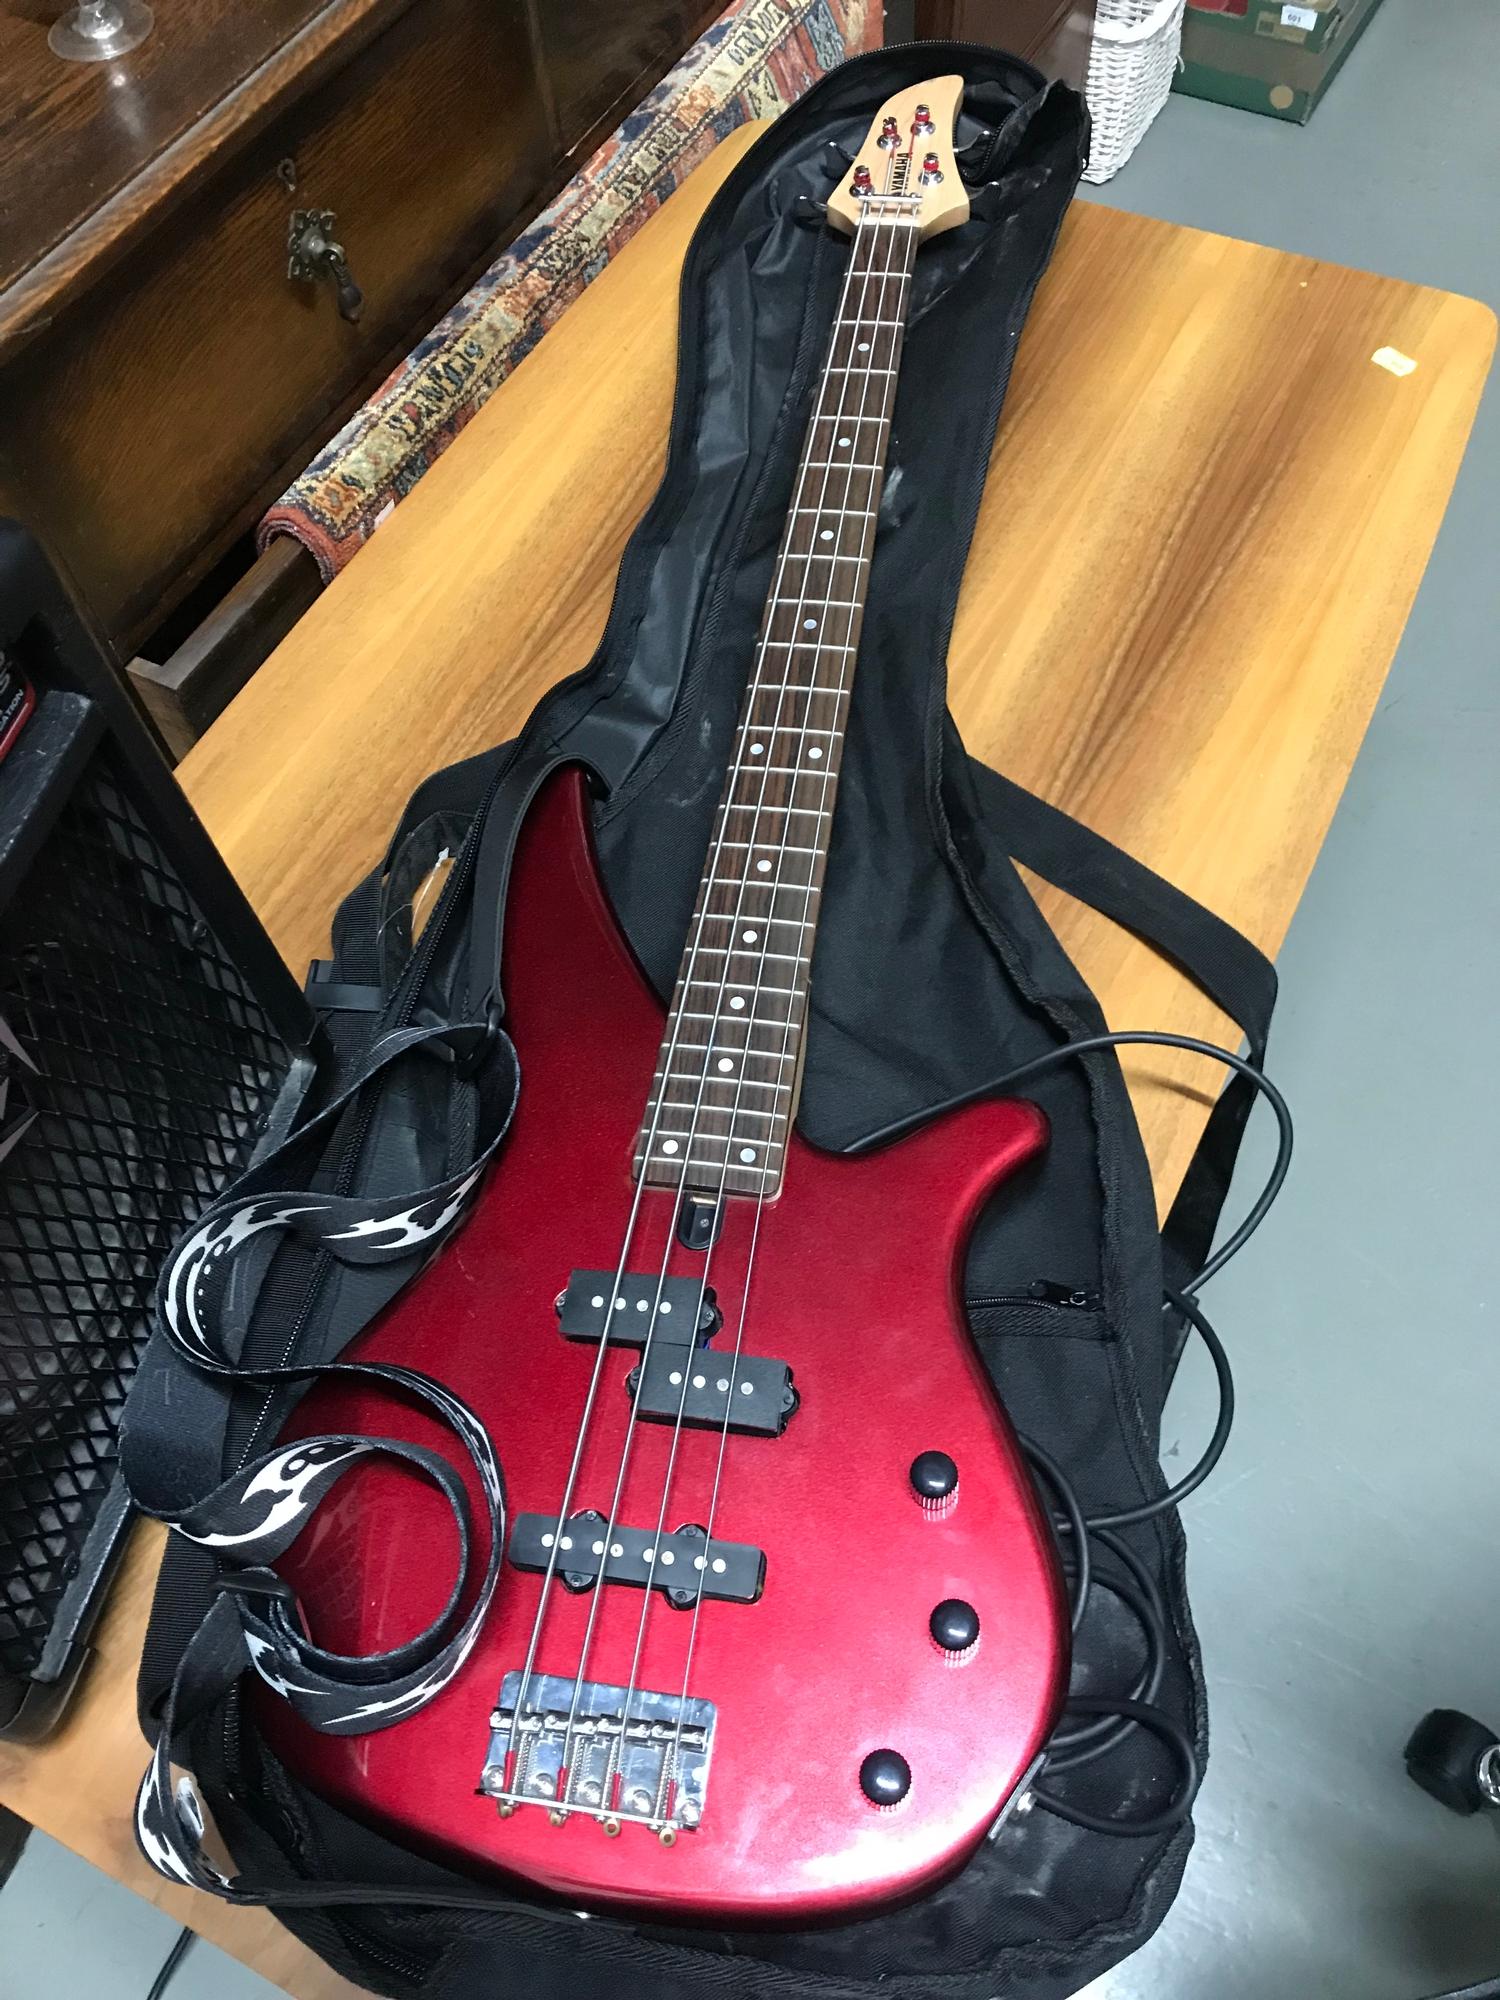 Yamaha Bass Guitar together with Peavey amplifier. - Image 2 of 3